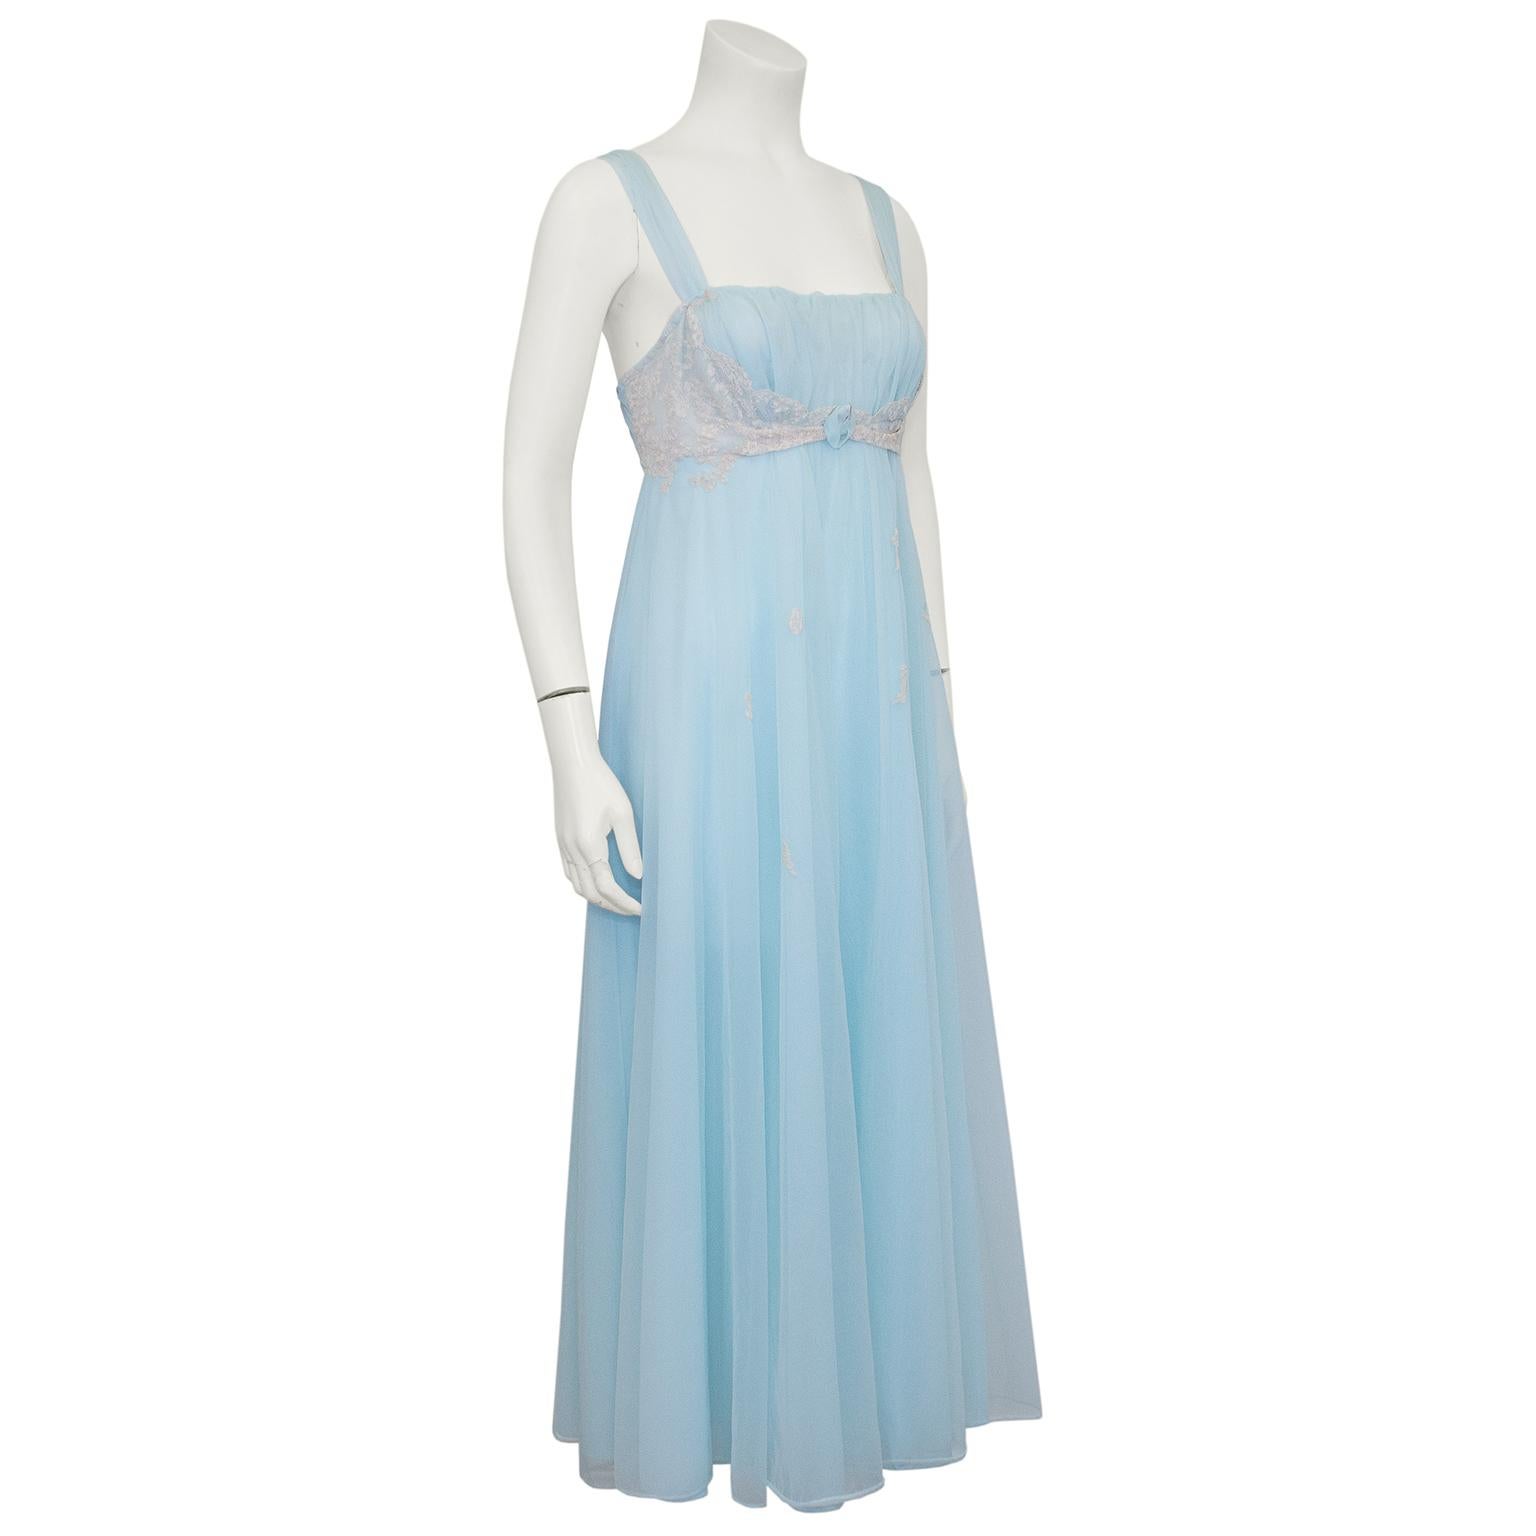 Beautiful 1960s baby blue nylon chiffon hostess gown featuring a gathered bust and empire waist with cream lace details and a baby blue rosette. Small lace details cascade down flowing floor length skirt. Back features same delicate lace details.